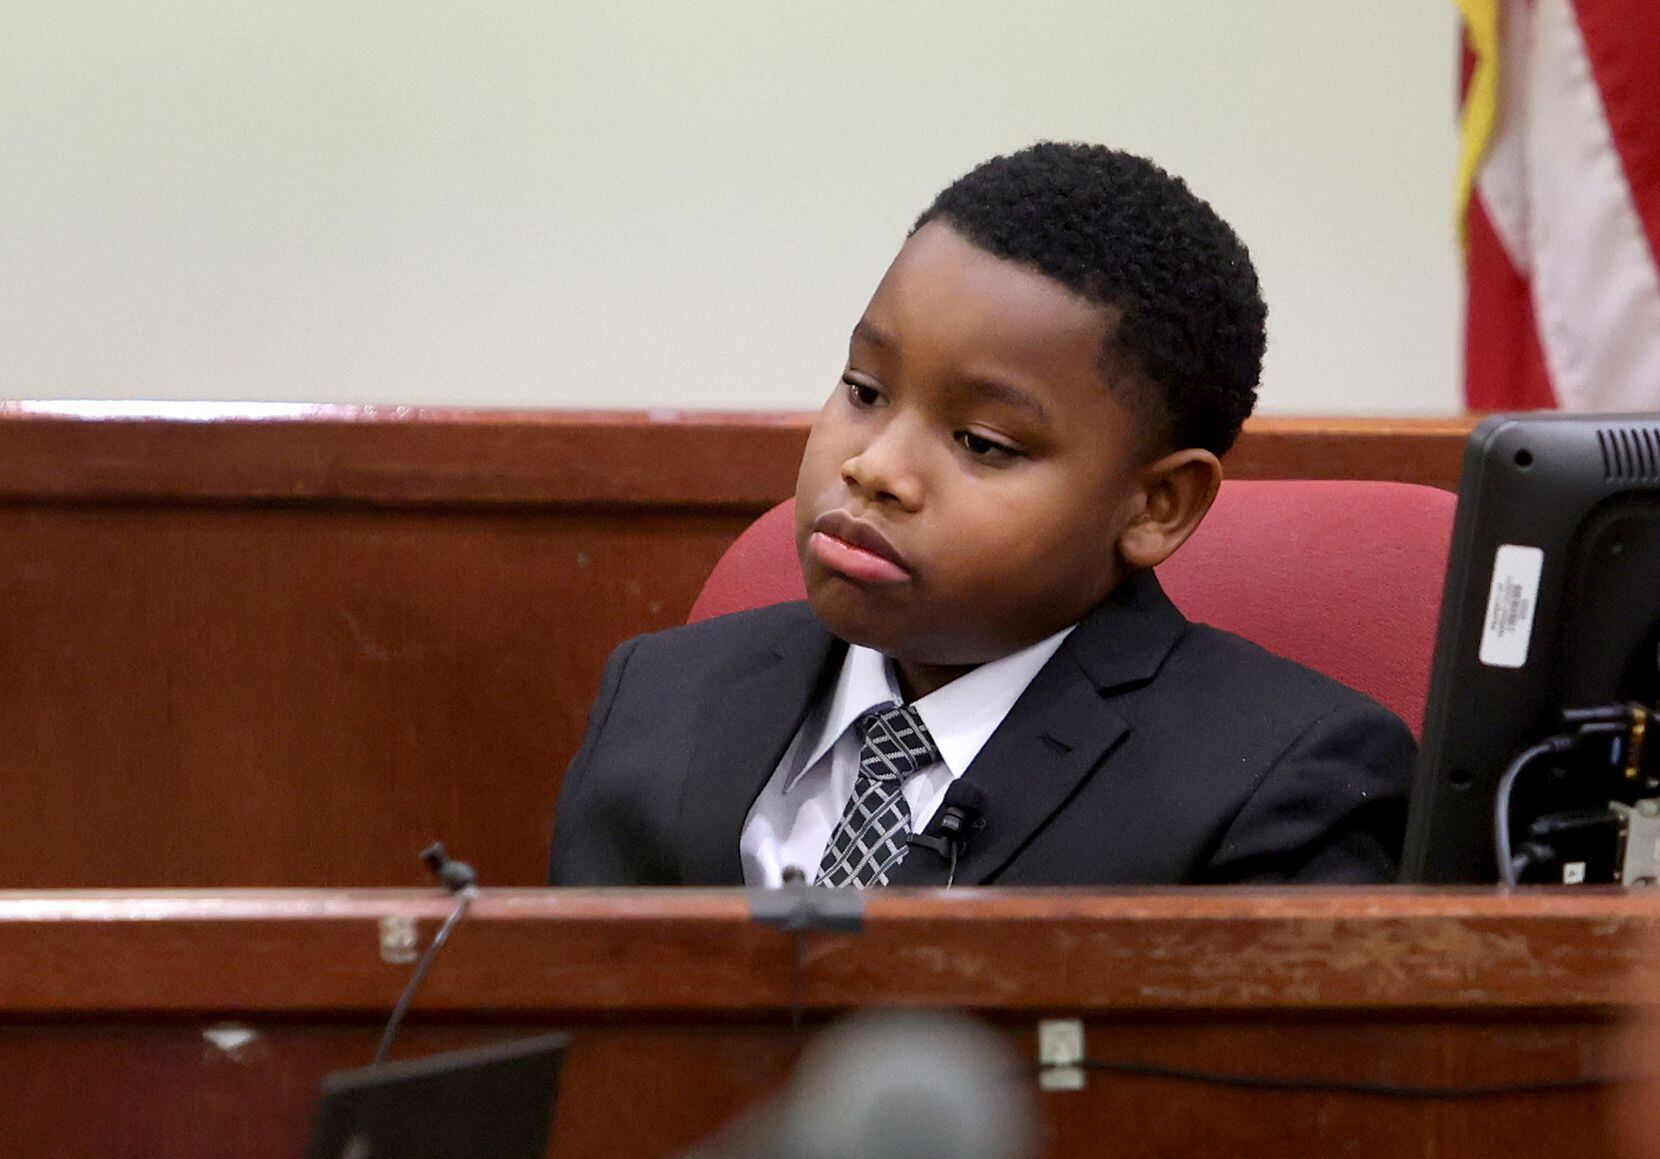 Zion Carr, 11, testified during the murder trial of former Fort Worth police officer Aaron...